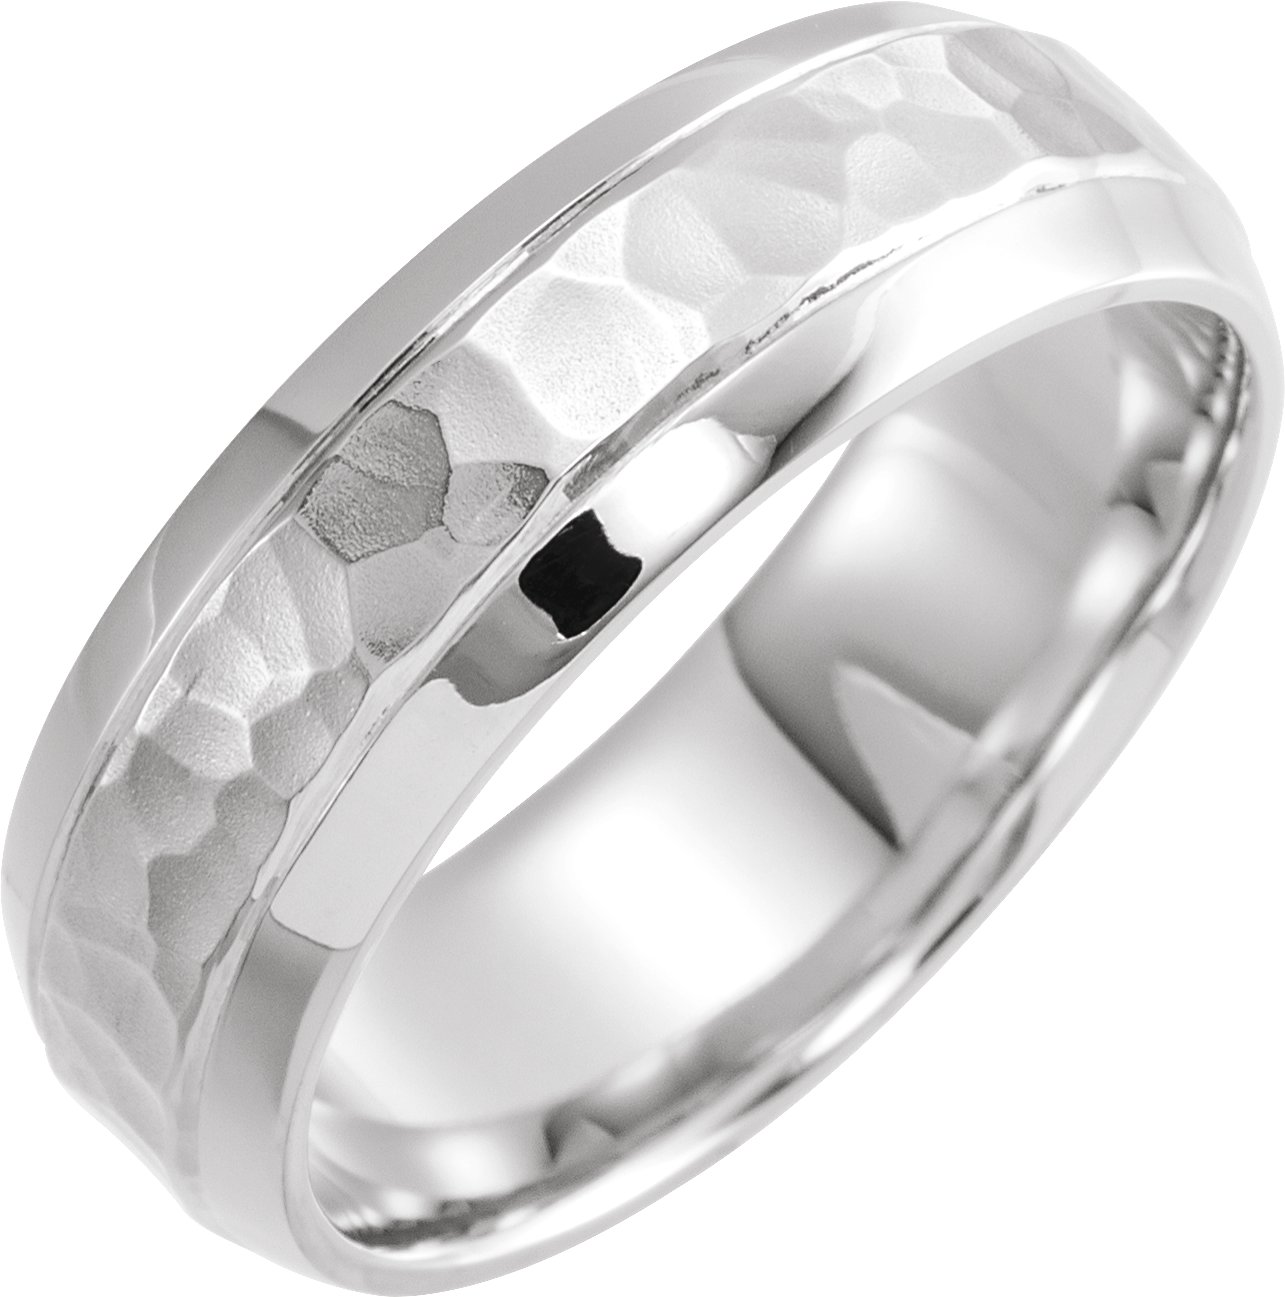 Platinum 7 mm Beveled-Edge Band with Hammered Texture Size 9.5